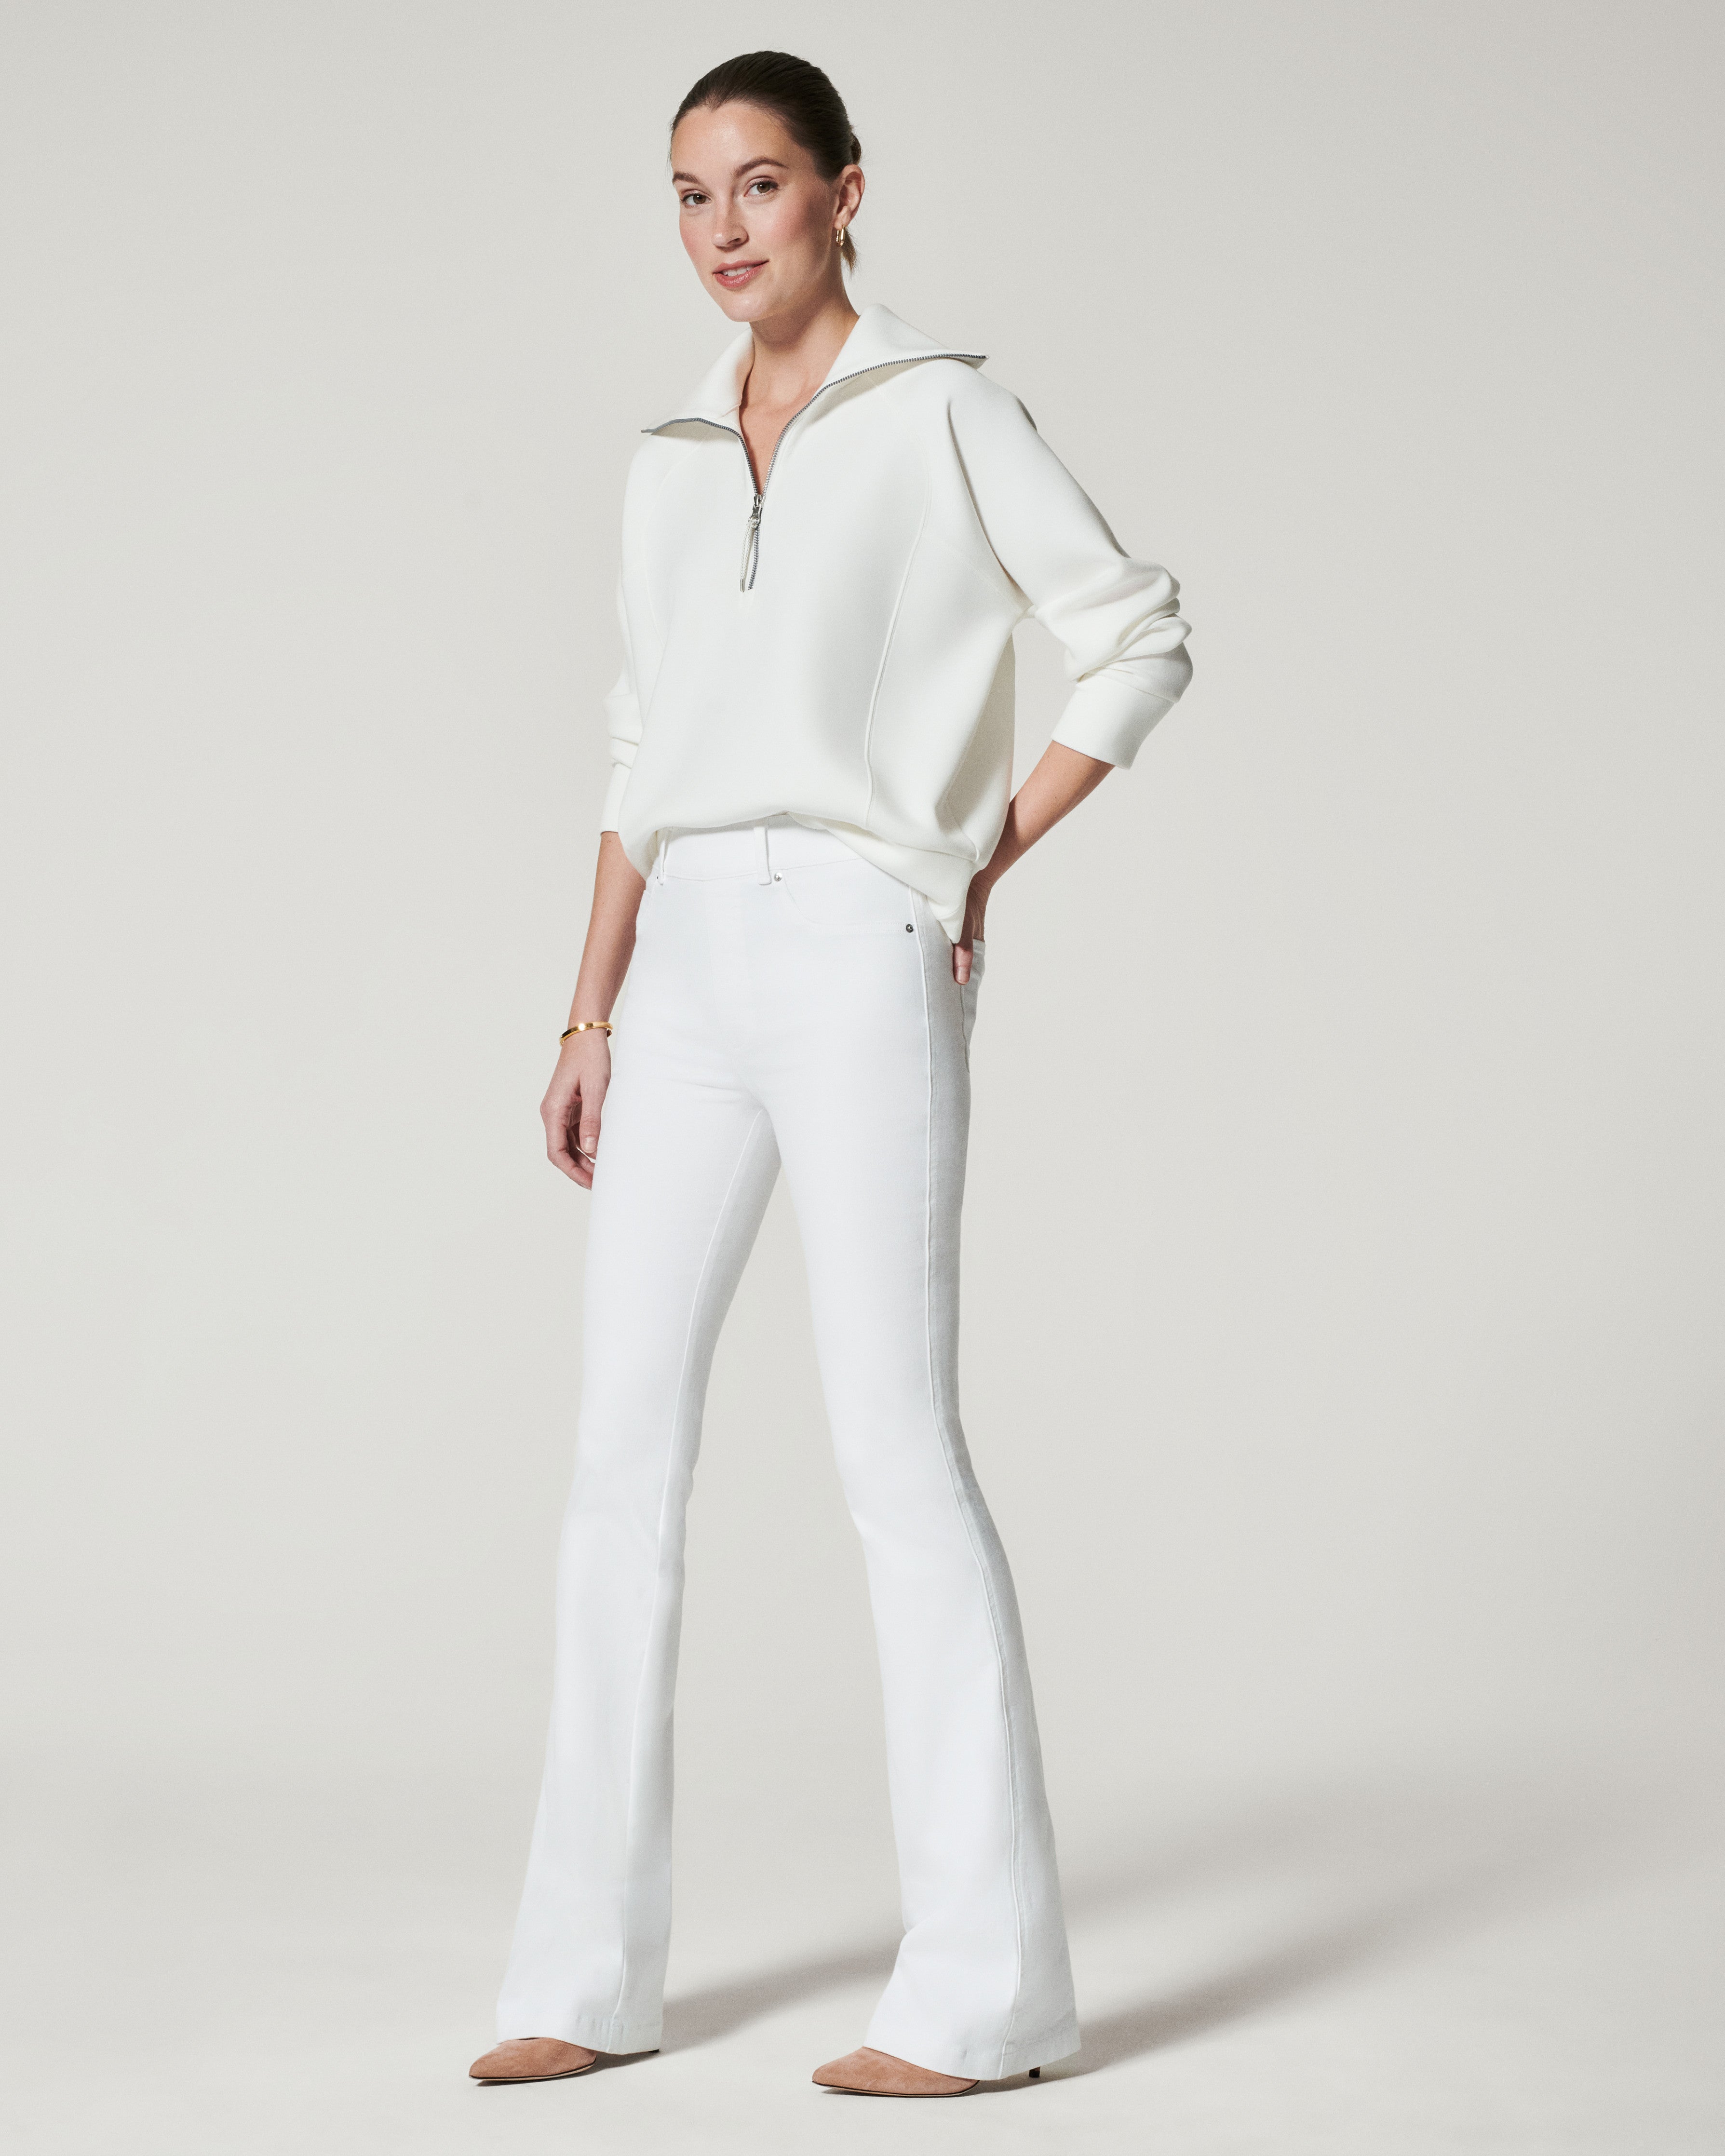 Tall Women White Bell Bottom Pants Suit Set With White Blazer